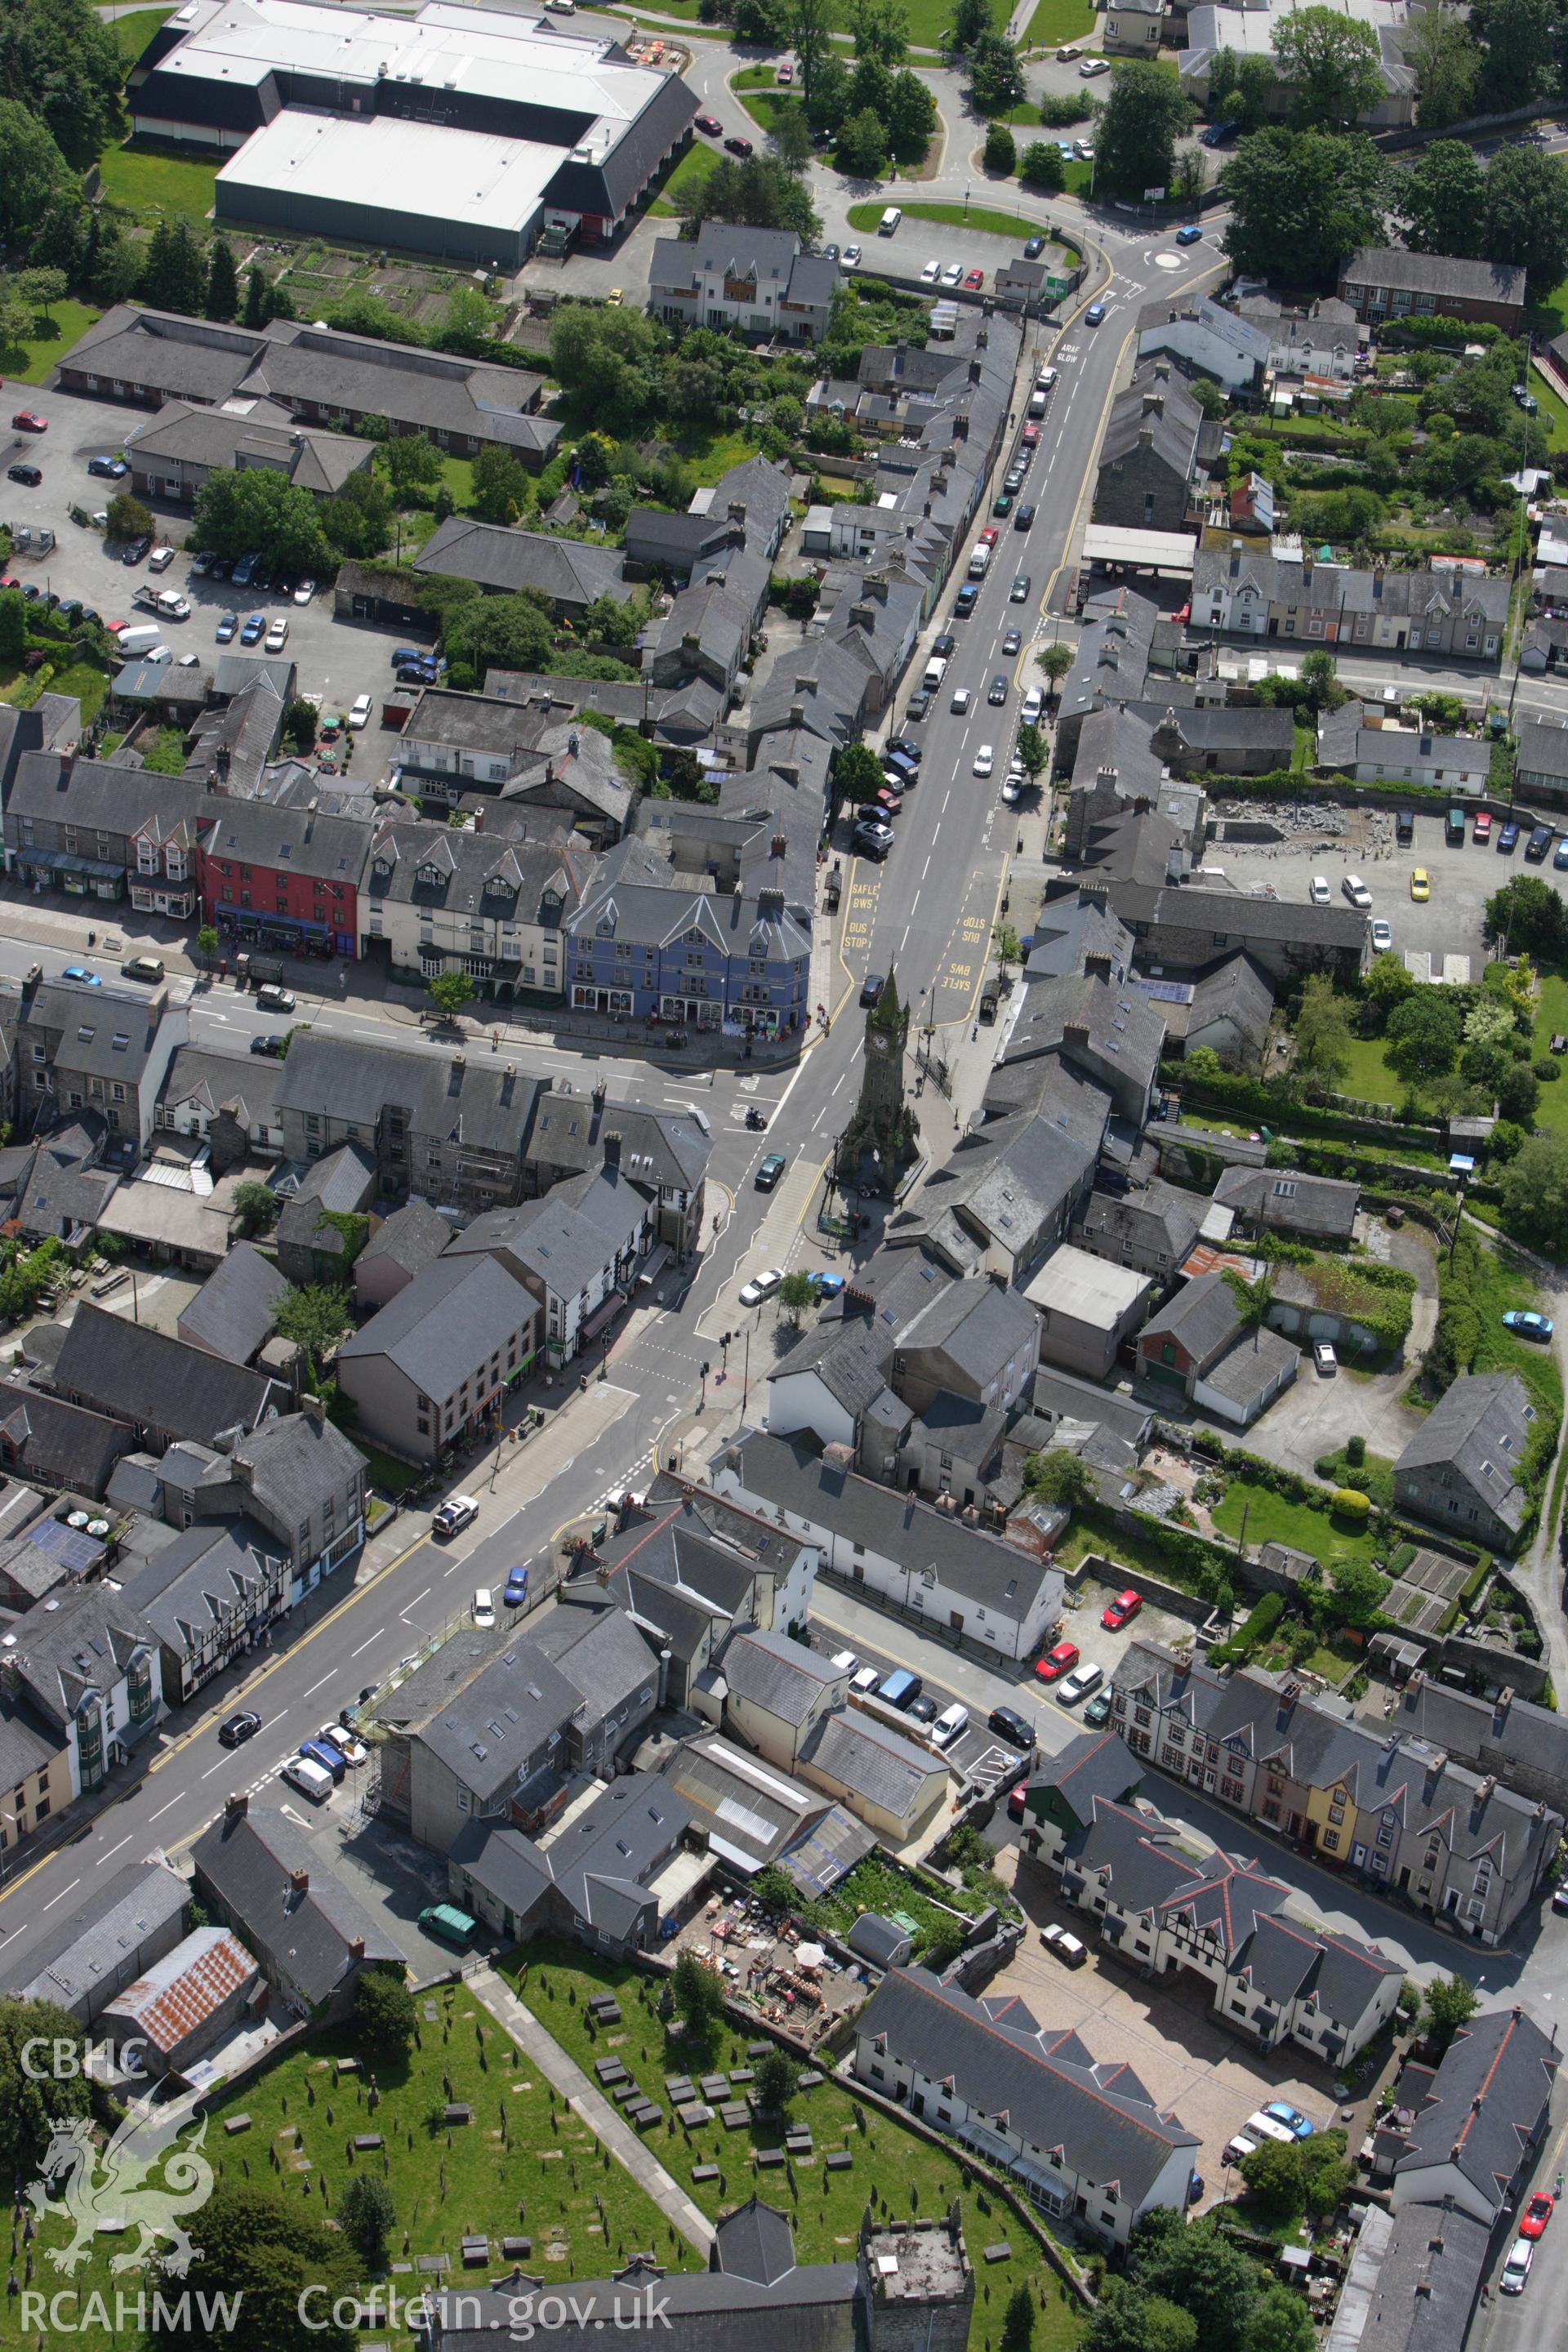 RCAHMW colour oblique aerial photograph of Machynlleth town. Taken on 02 June 2009 by Toby Driver